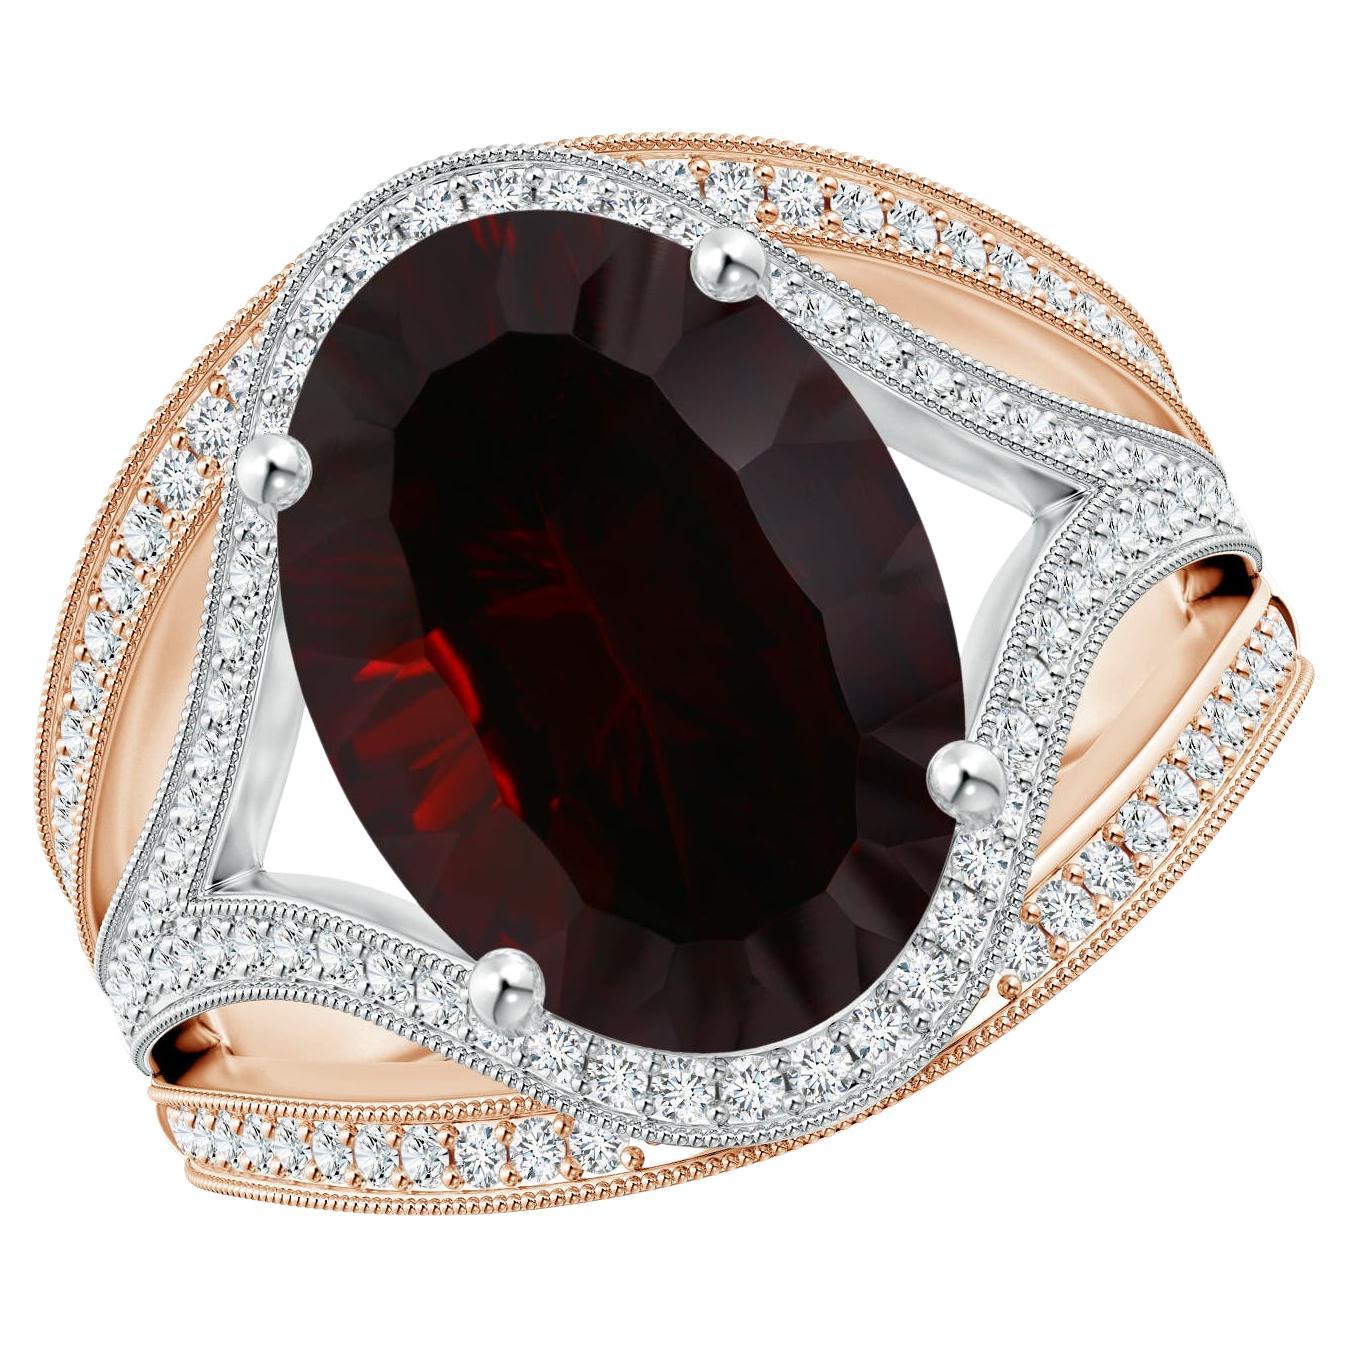 For Sale:  GIA Certified Natural Garnet Ornate Shank Rose & White Gold Cocktail Ring